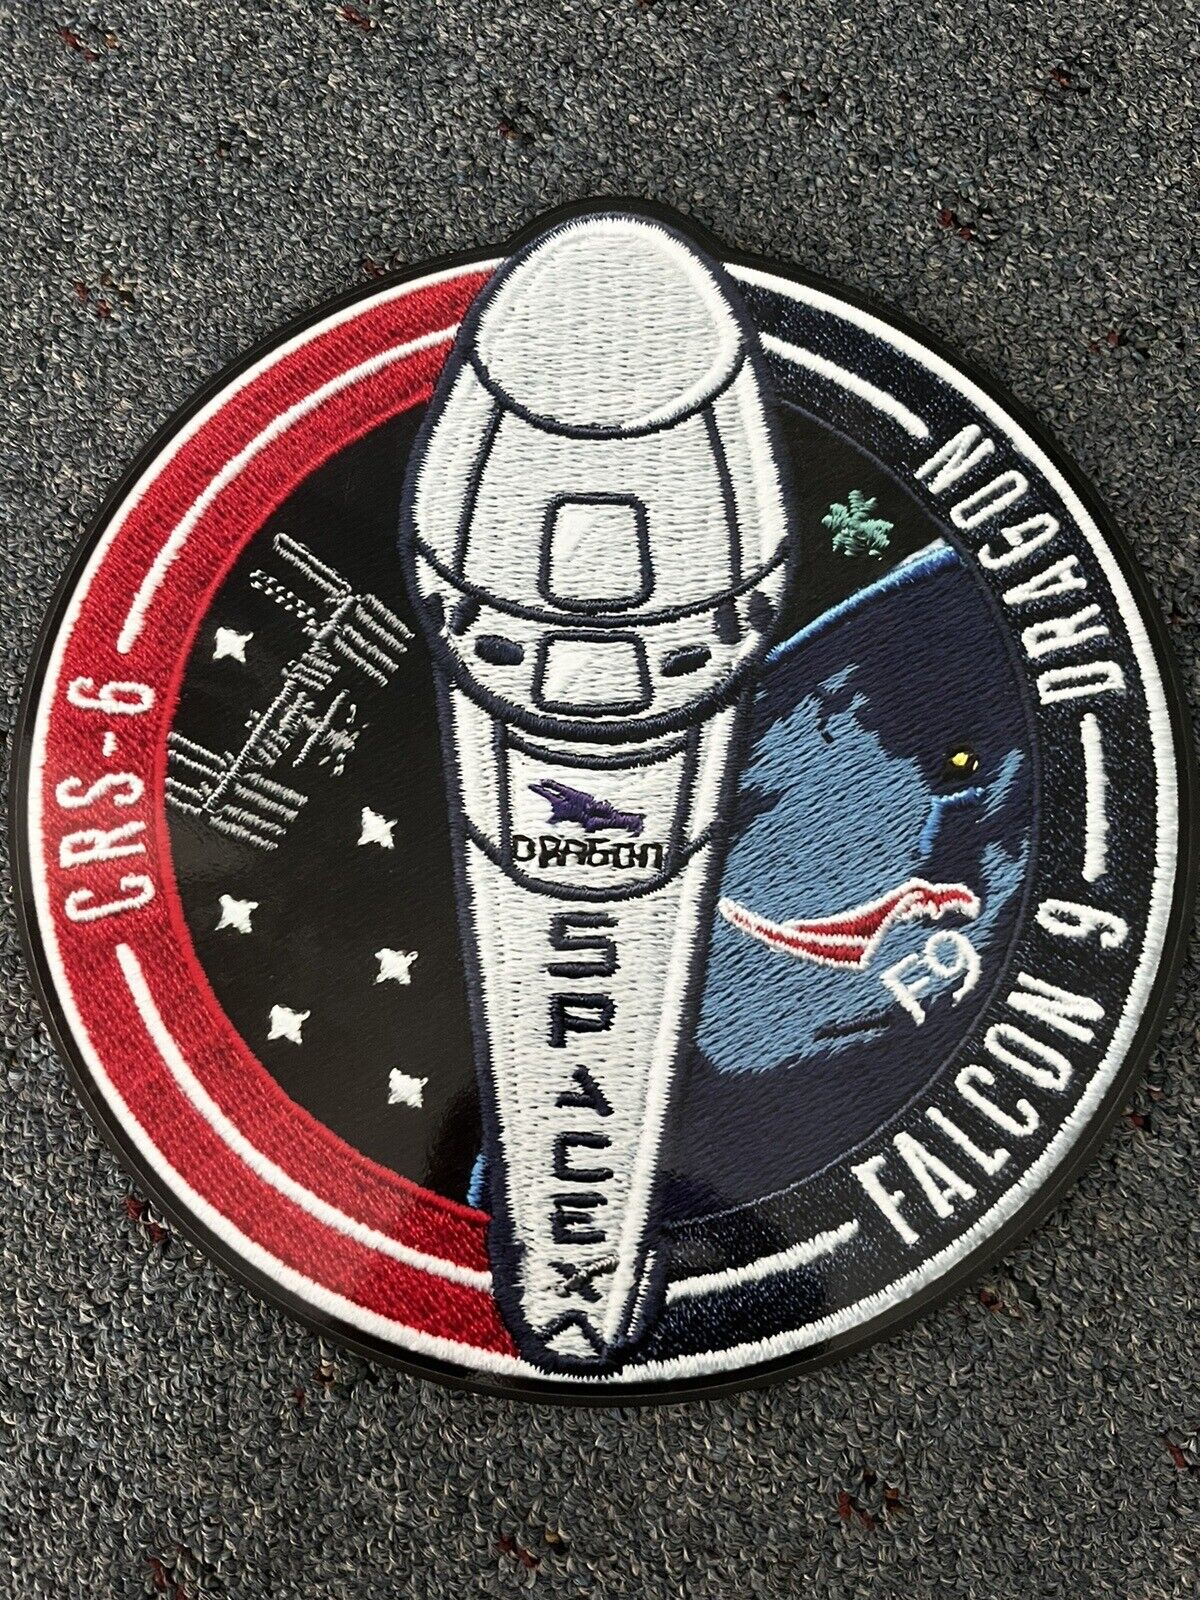 Space X Wall Sign / Patch Sign / Falcon 9 CRS-6 DRAGON CAPSULE